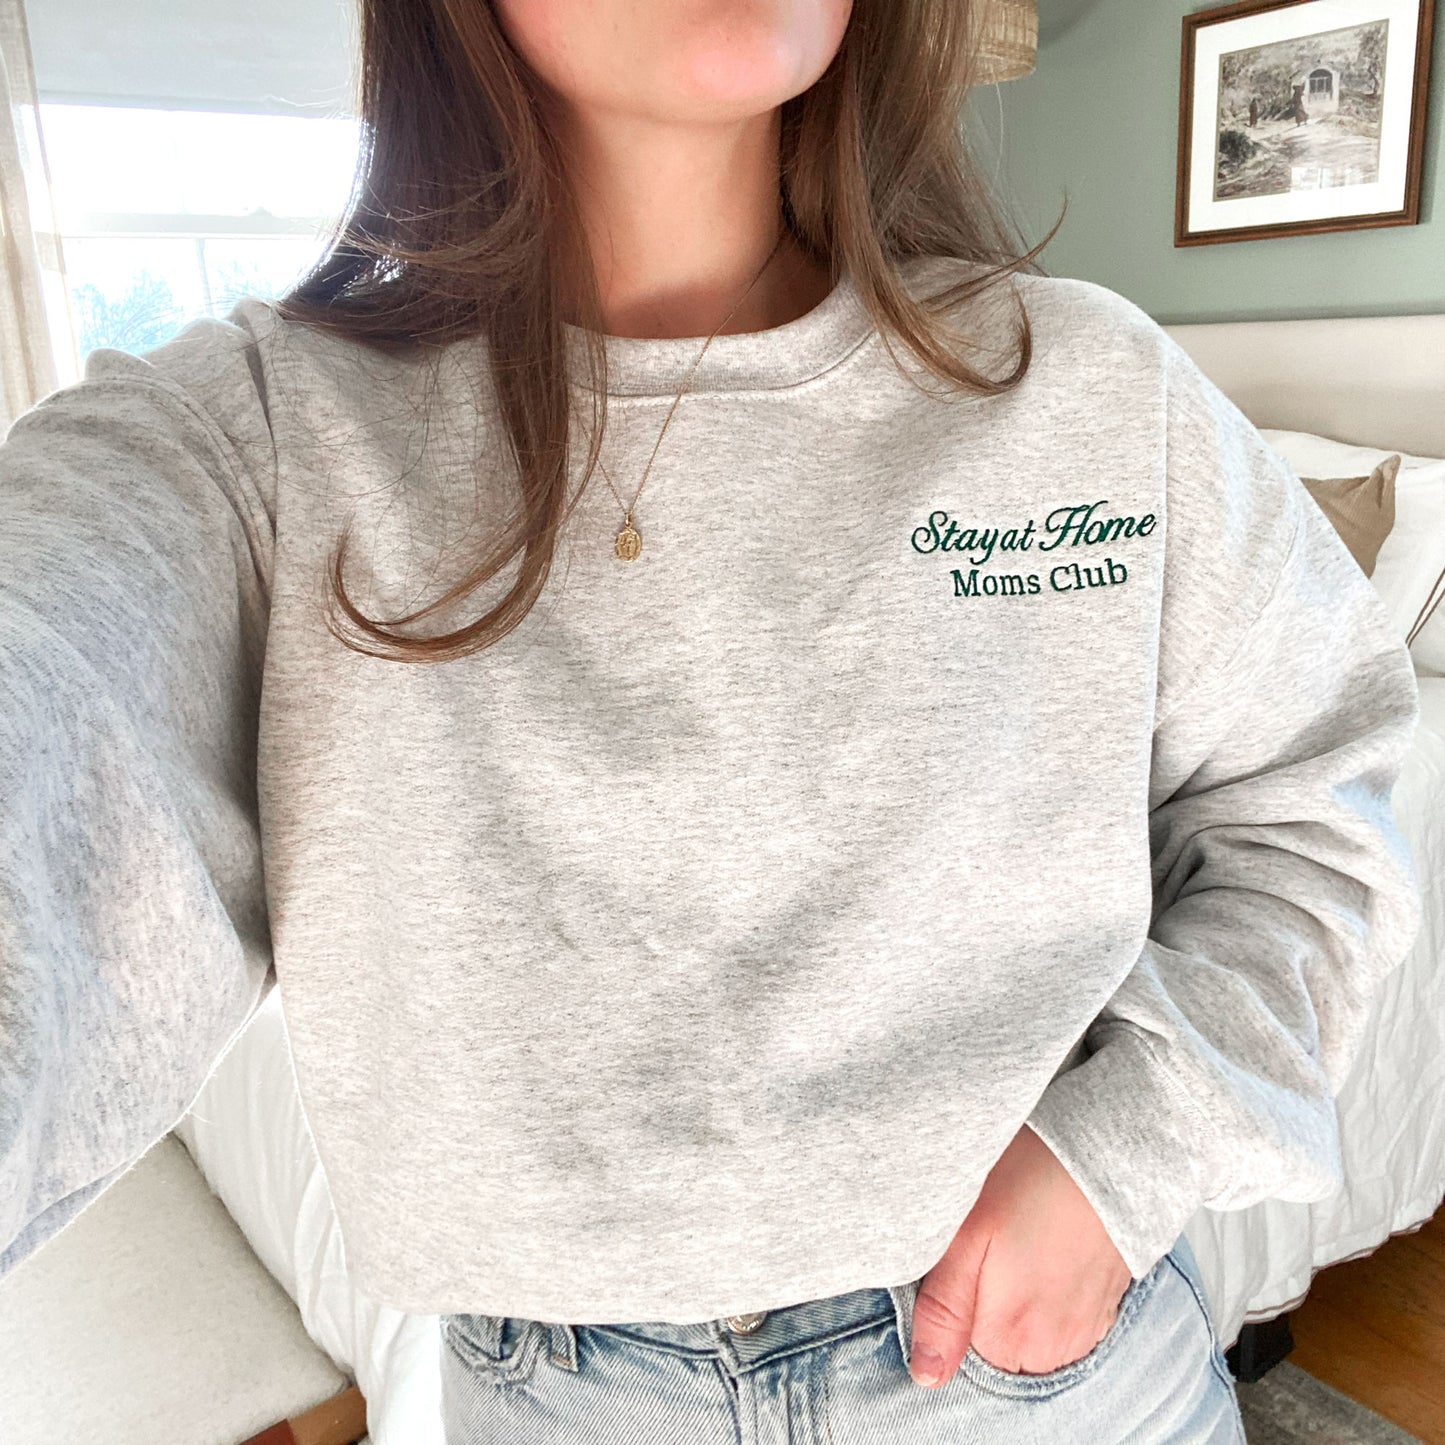  young woman wearing an ash crewneck sweatshirt with embroidered stay at home moms cub design on the left chest in hunter green thread